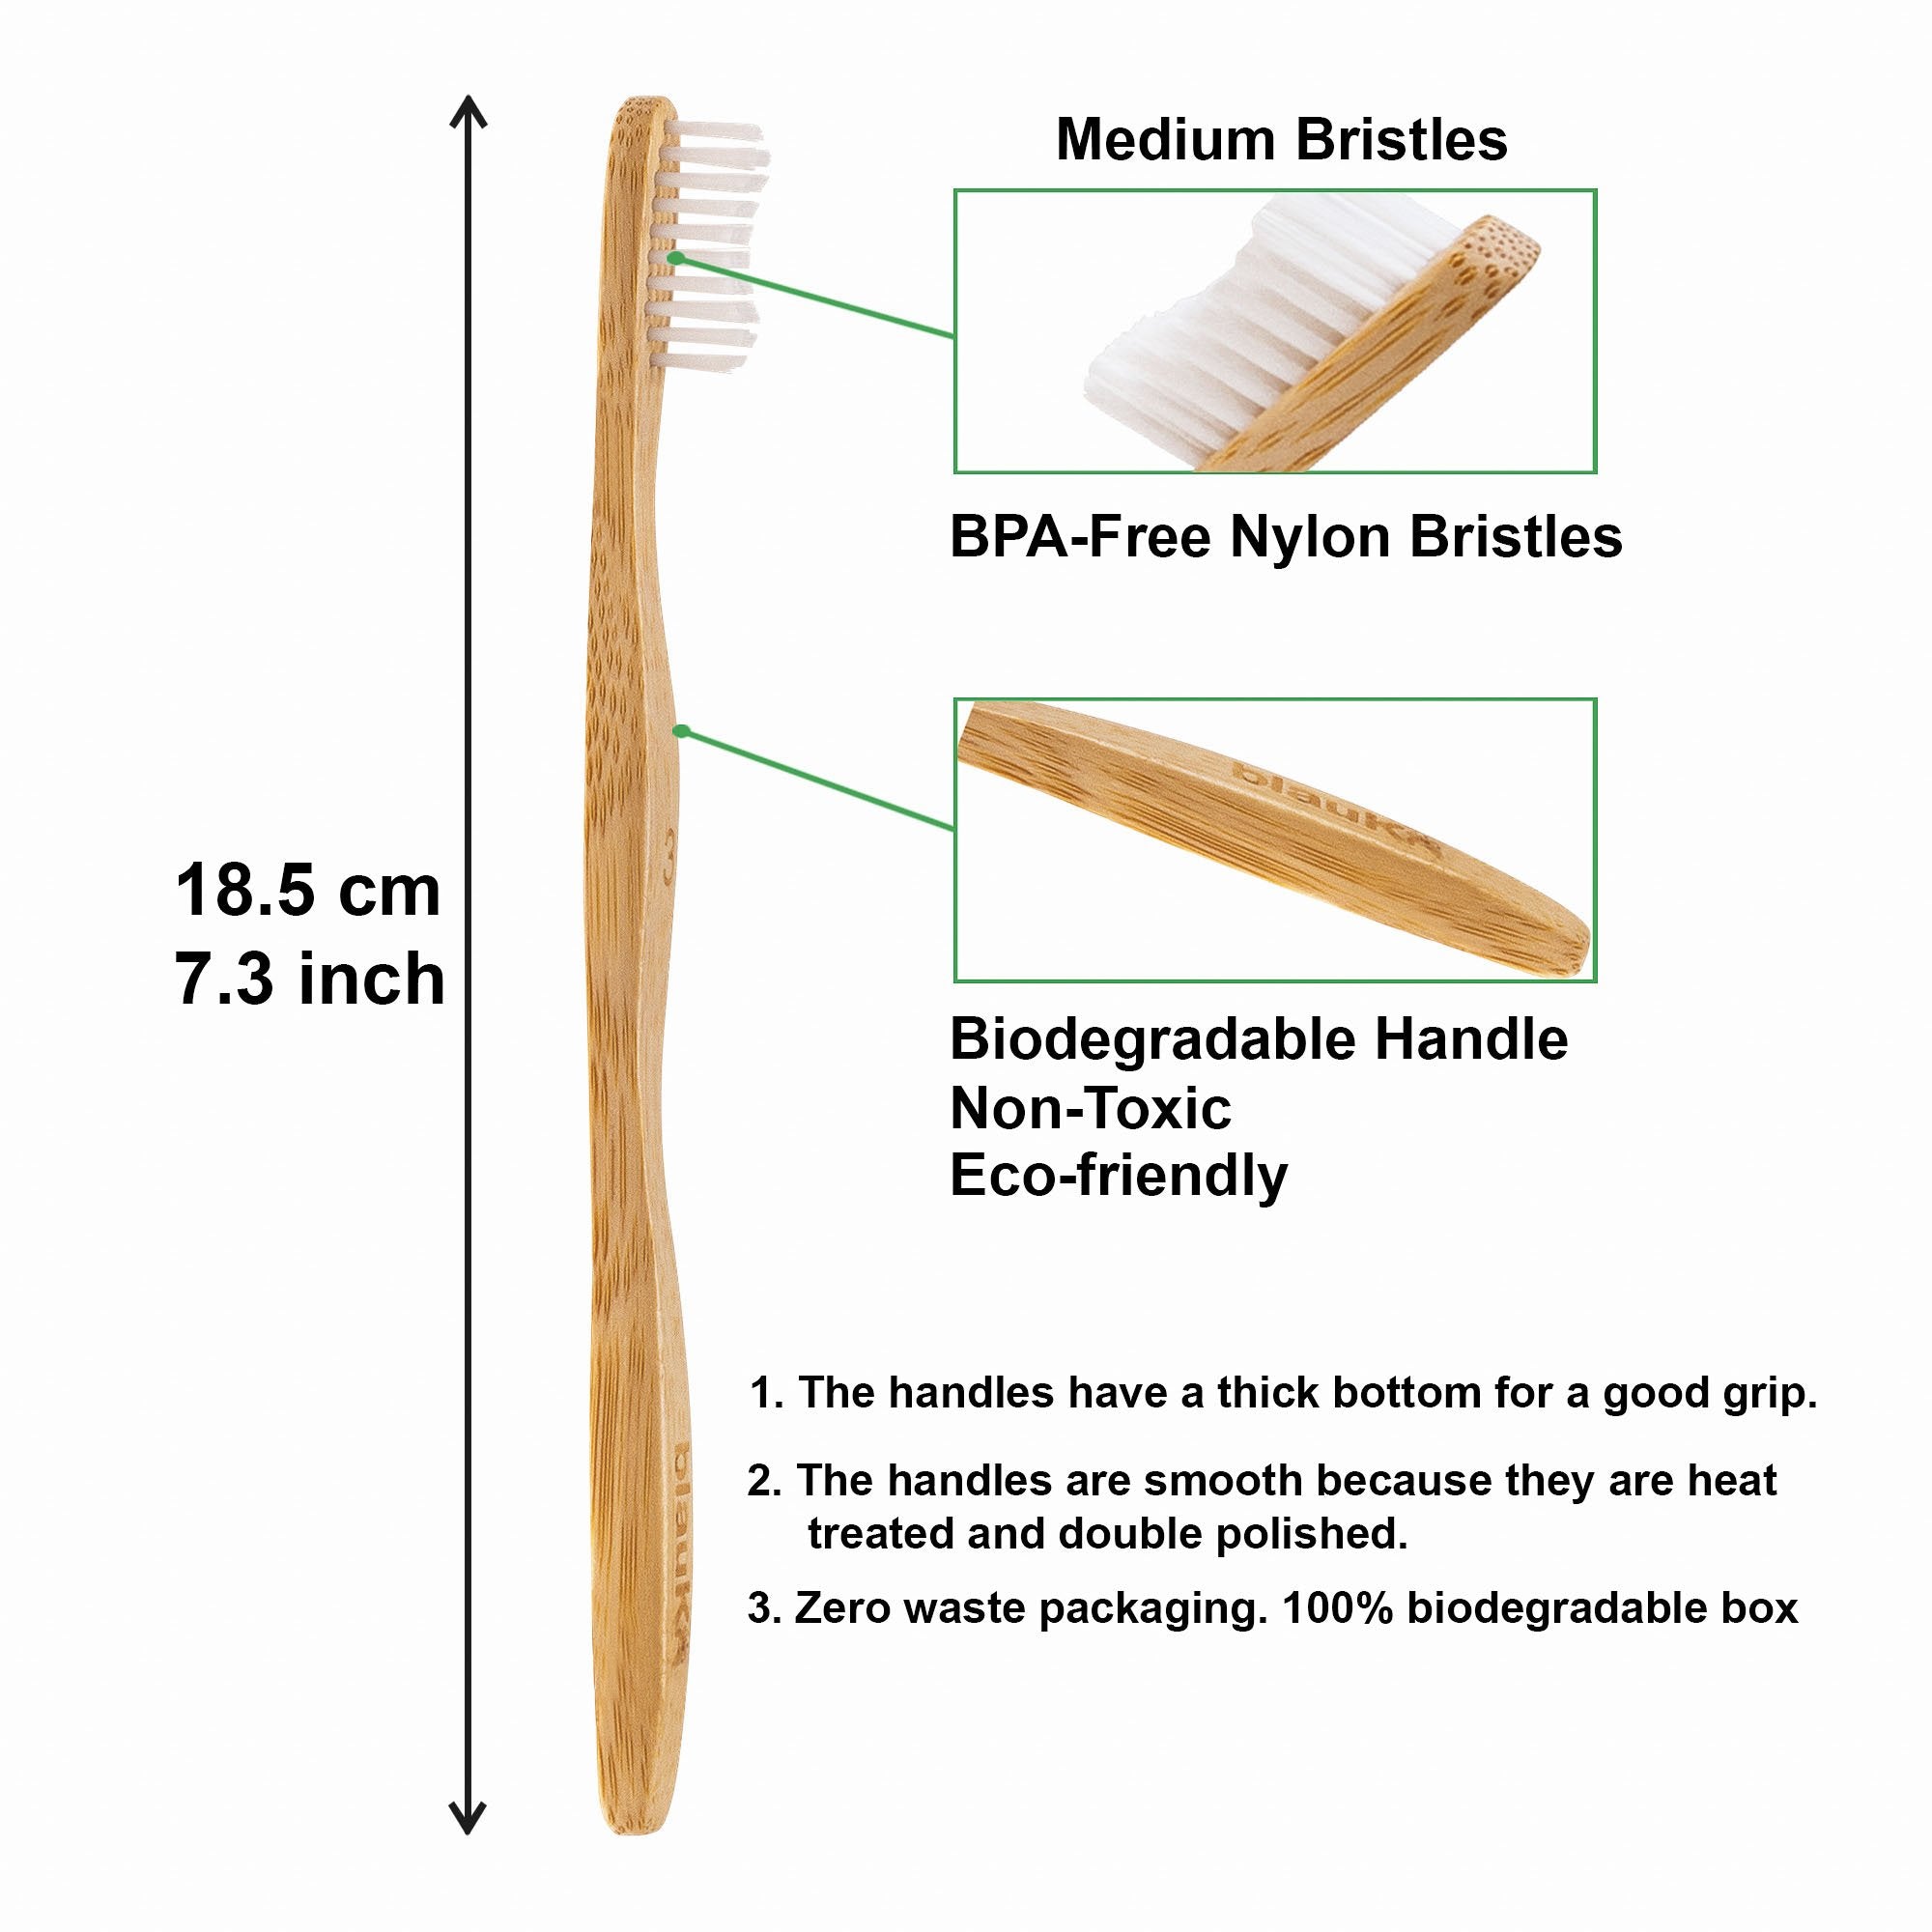 Bamboo Toothbrush Set 5-Pack - Bamboo Toothbrushes with Medium Bristles for Adults - Eco-Friendly, Biodegradable, Natural Wooden Toothbrushes - KME means the very best